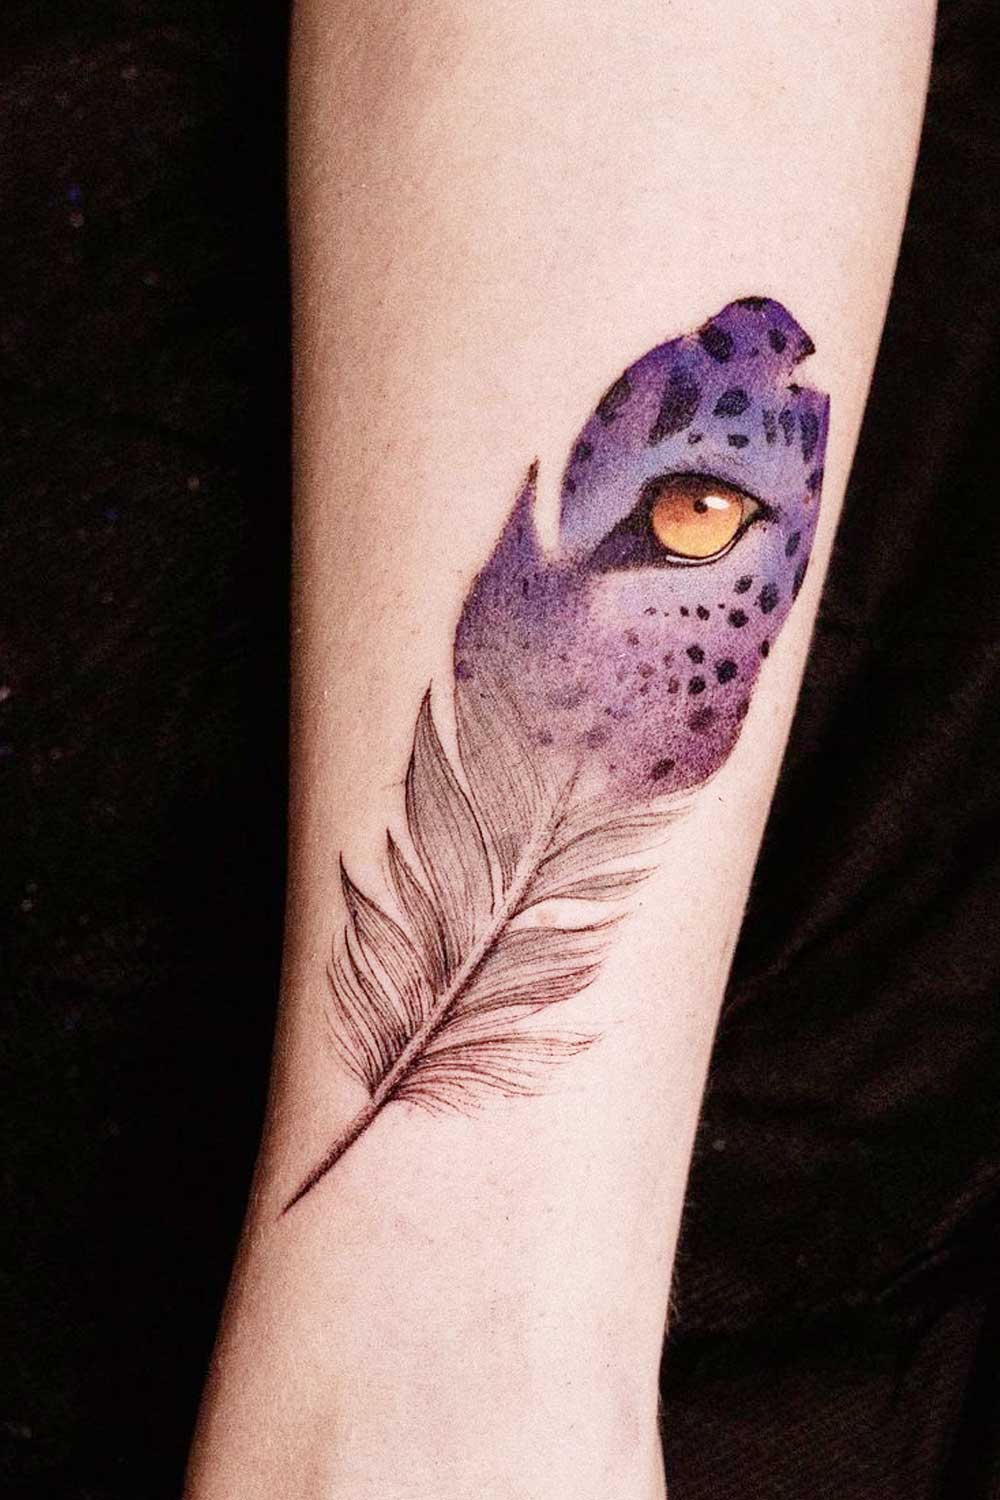 Trippink Tattoos - PEACOCK FEATHER TATTOO💚 BY #trippinktattoos . . Peacock  feathers symbolises nobility, royalty, spirituality, immortality,  incorruptibility, and of course—beauty! ... Lastly, in Persia, the bird was  considered invaluable to royalty